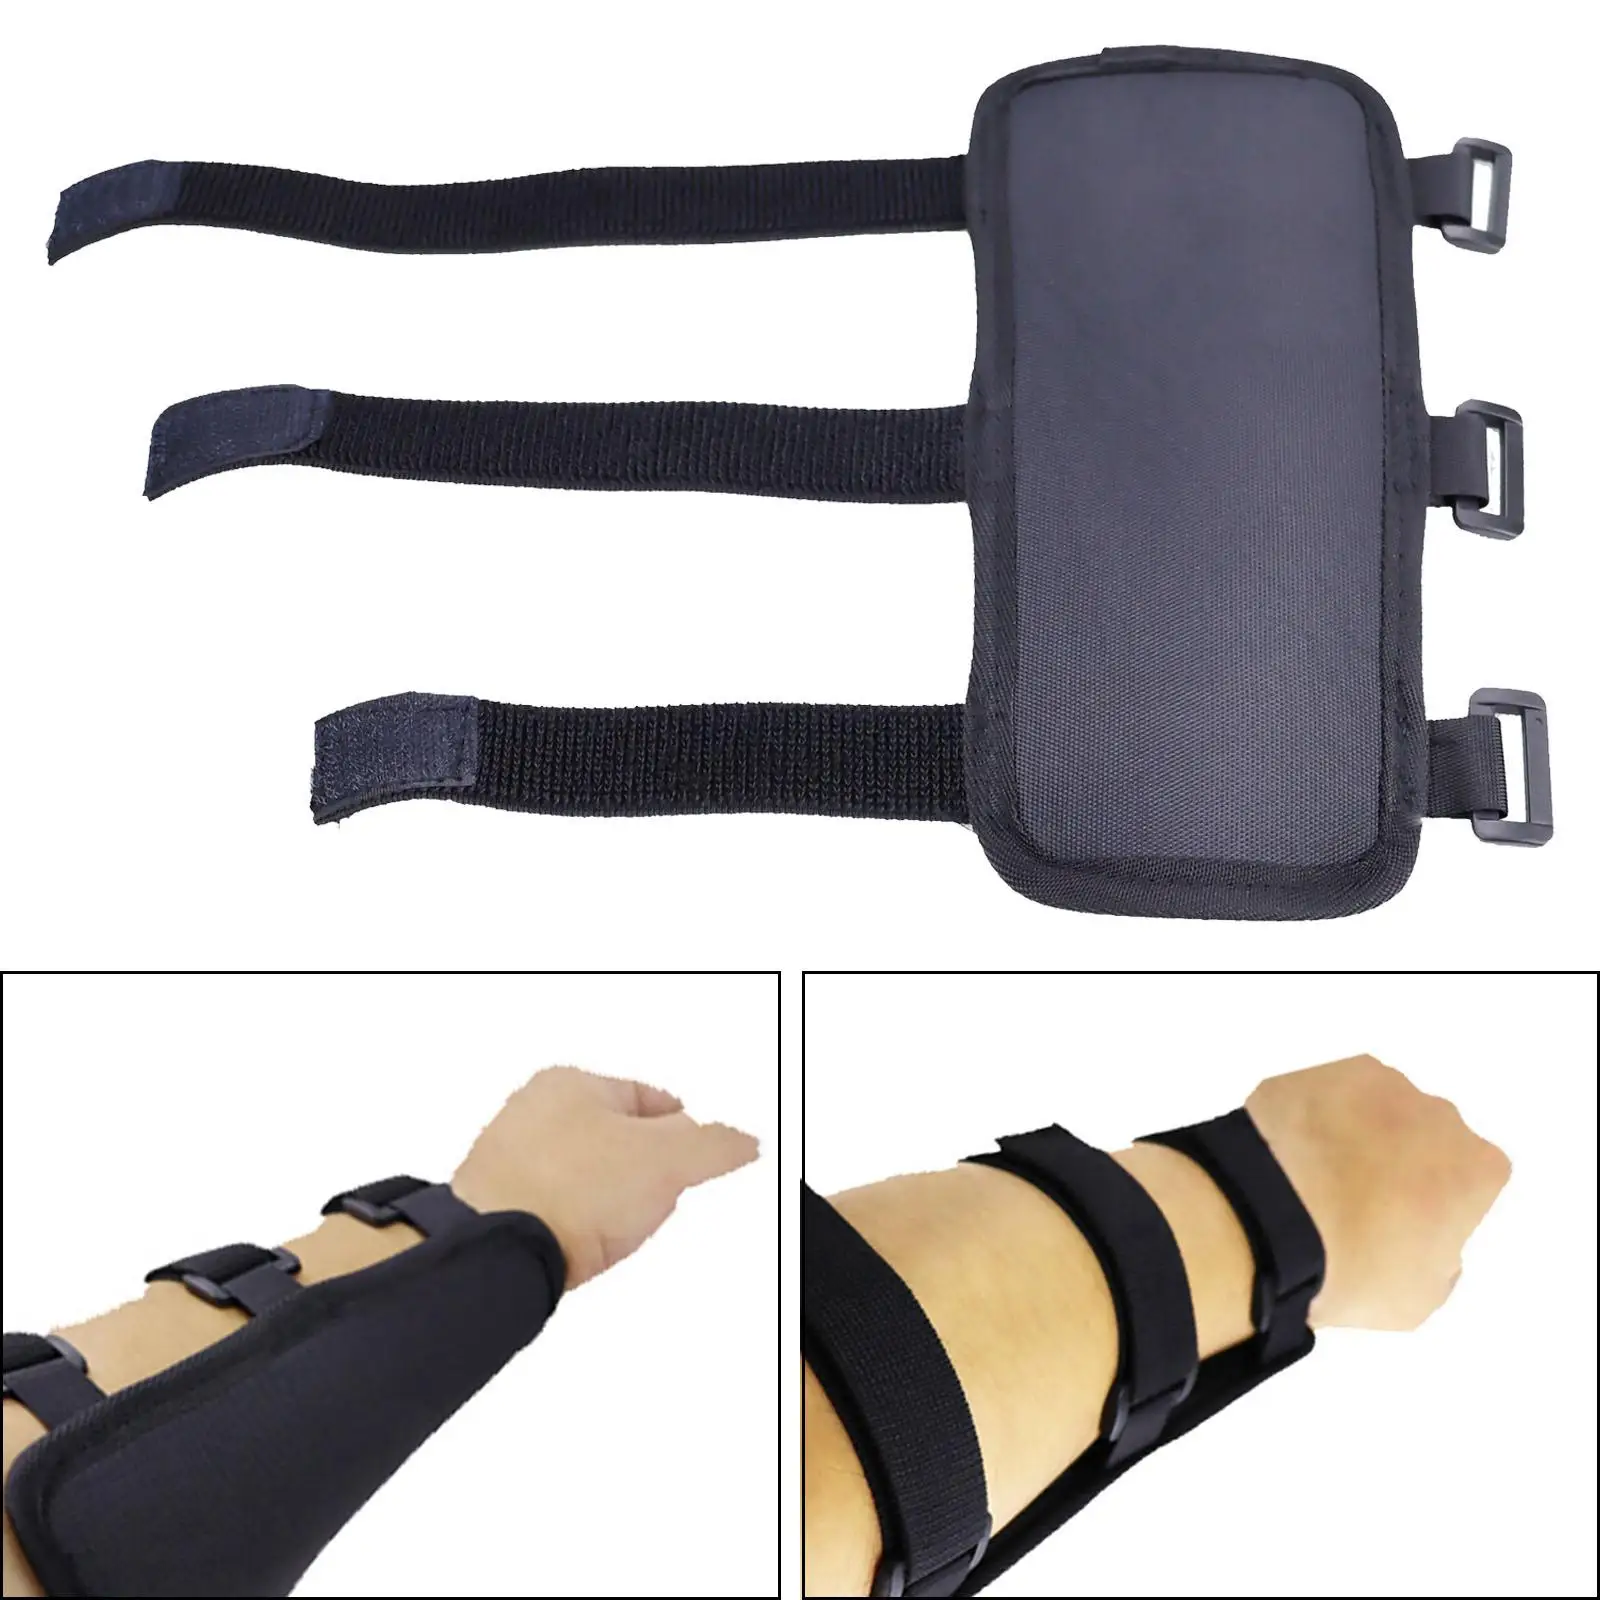 Archery Arm Protector Protective Gear Elastic Strap Long Sleeve Padded Armguard for Archery Adults Arrow Shooting Practice Women